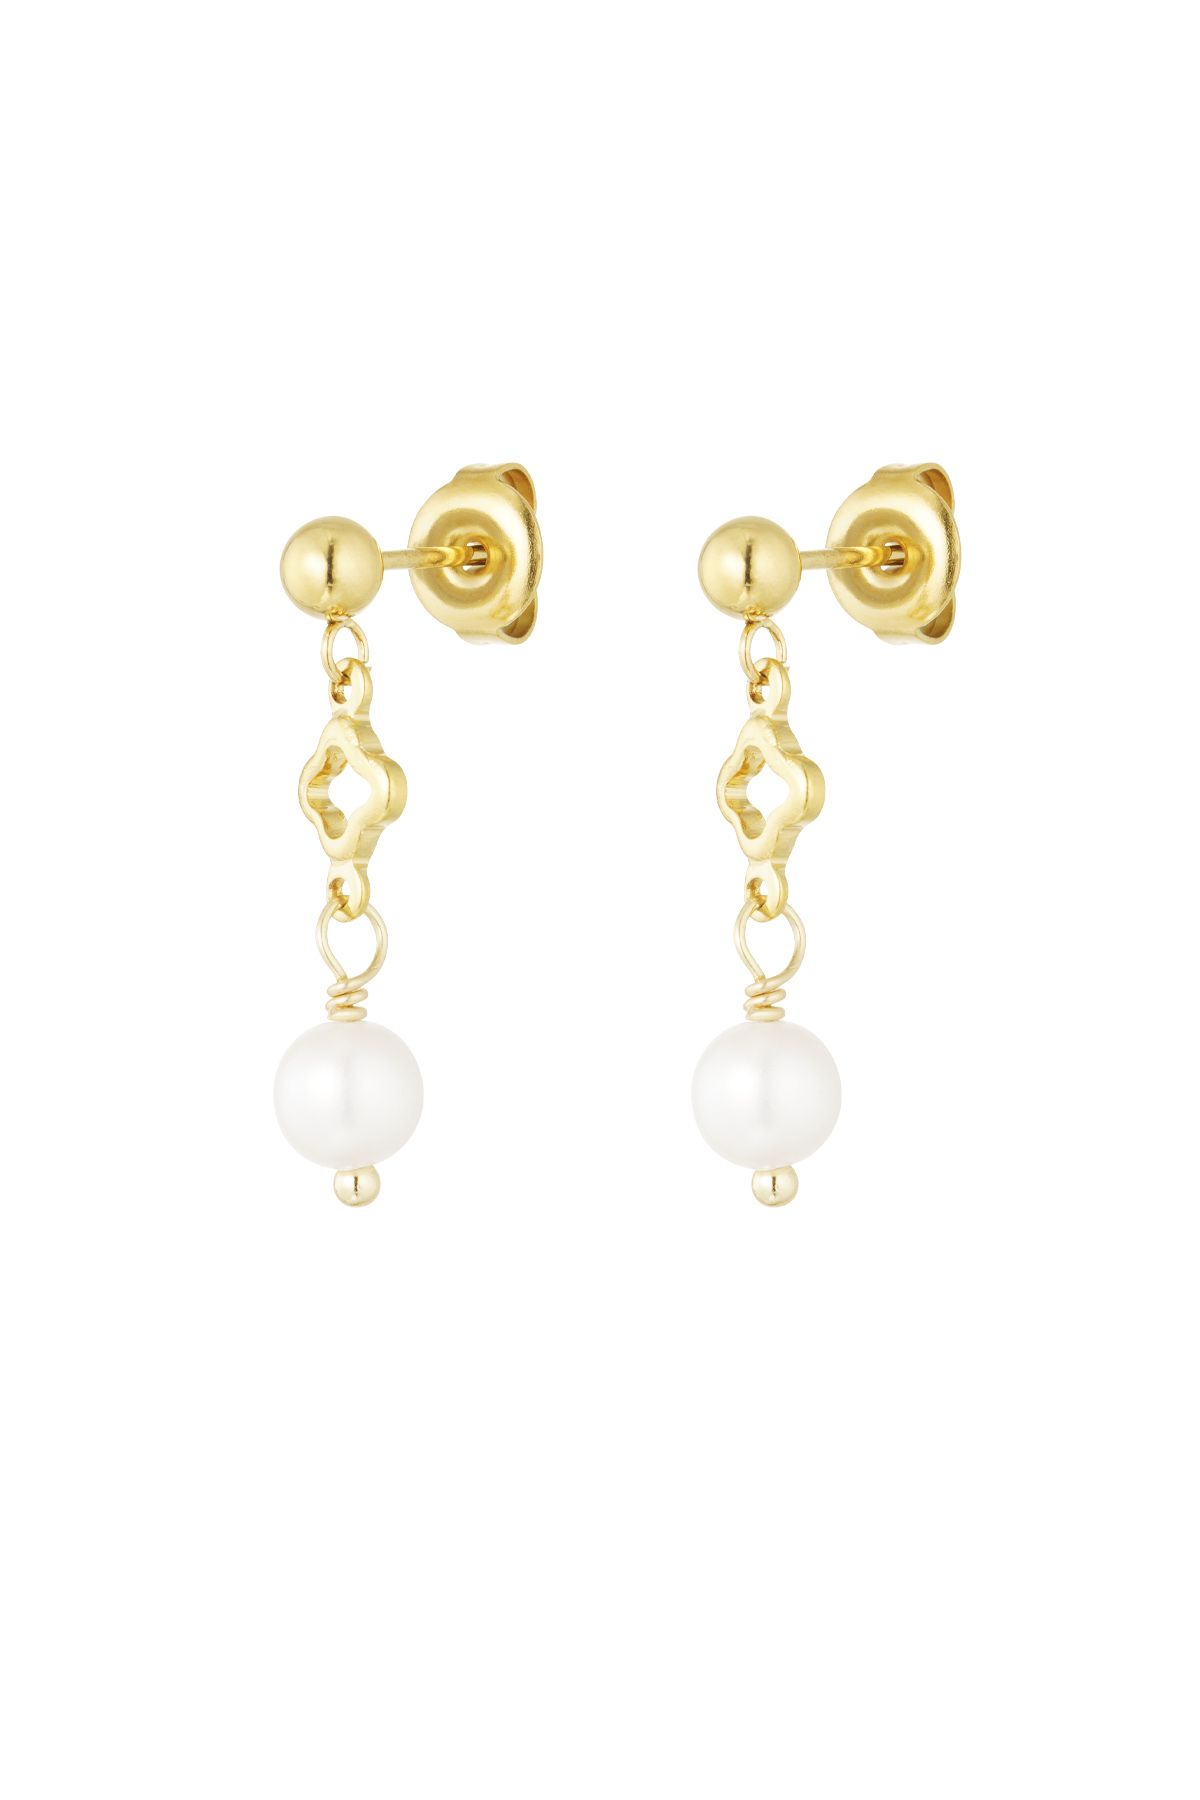 Earrings clover and pearl charm - gold h5 